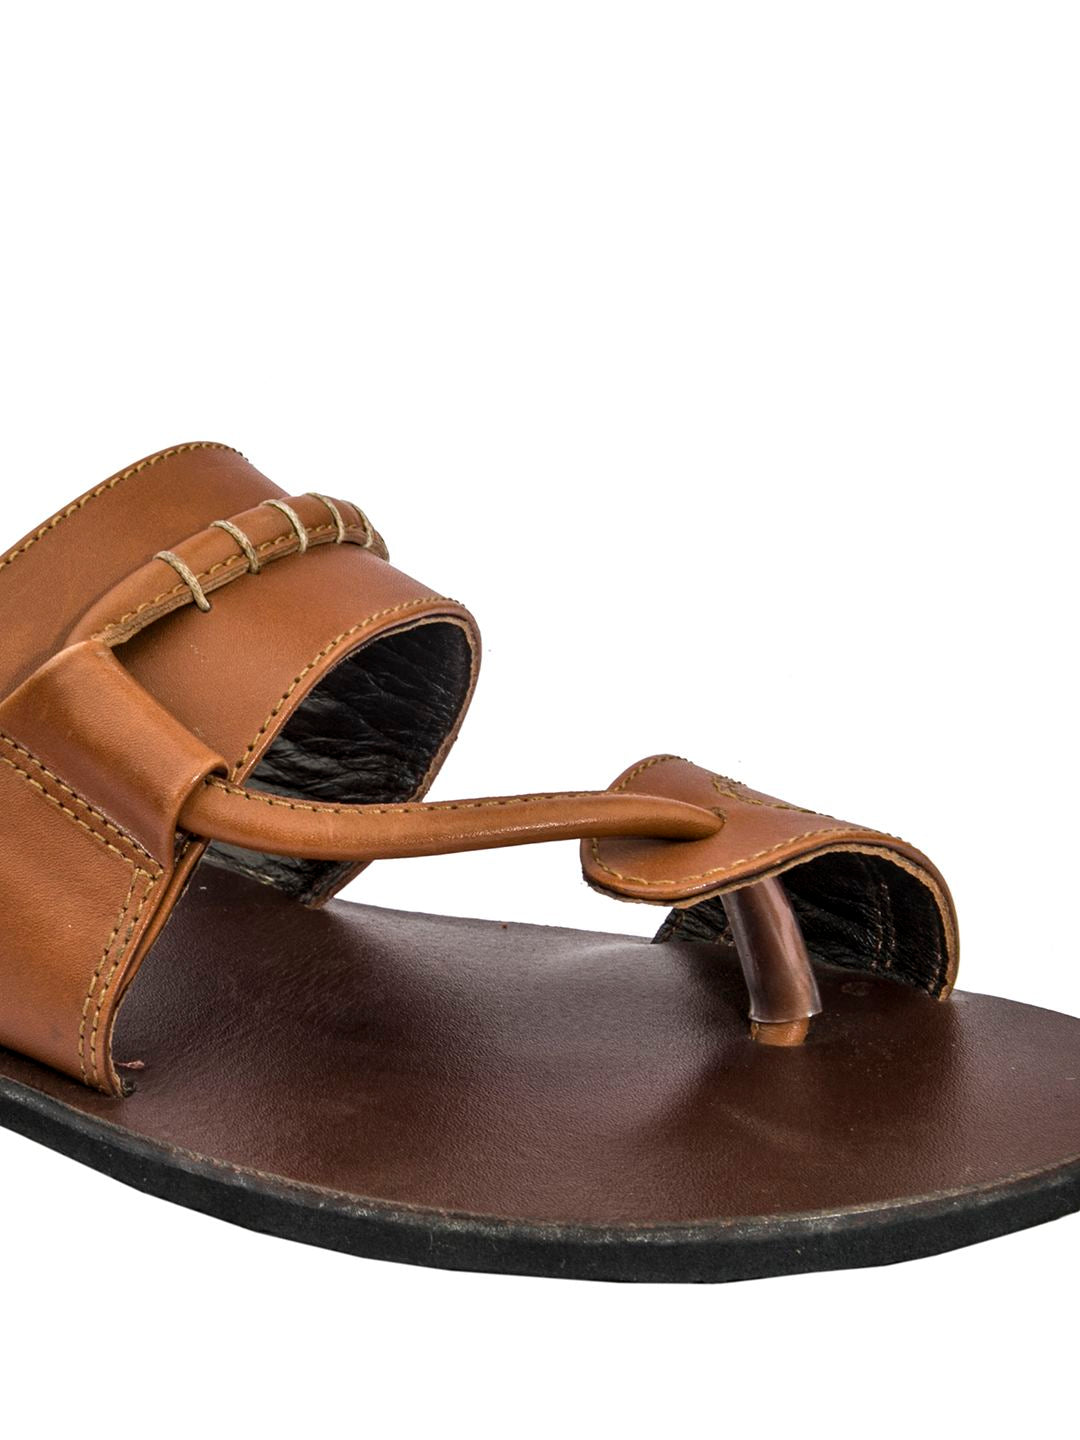 Timeless Style: Handmade Tan and Brown Leather Sandals for Men